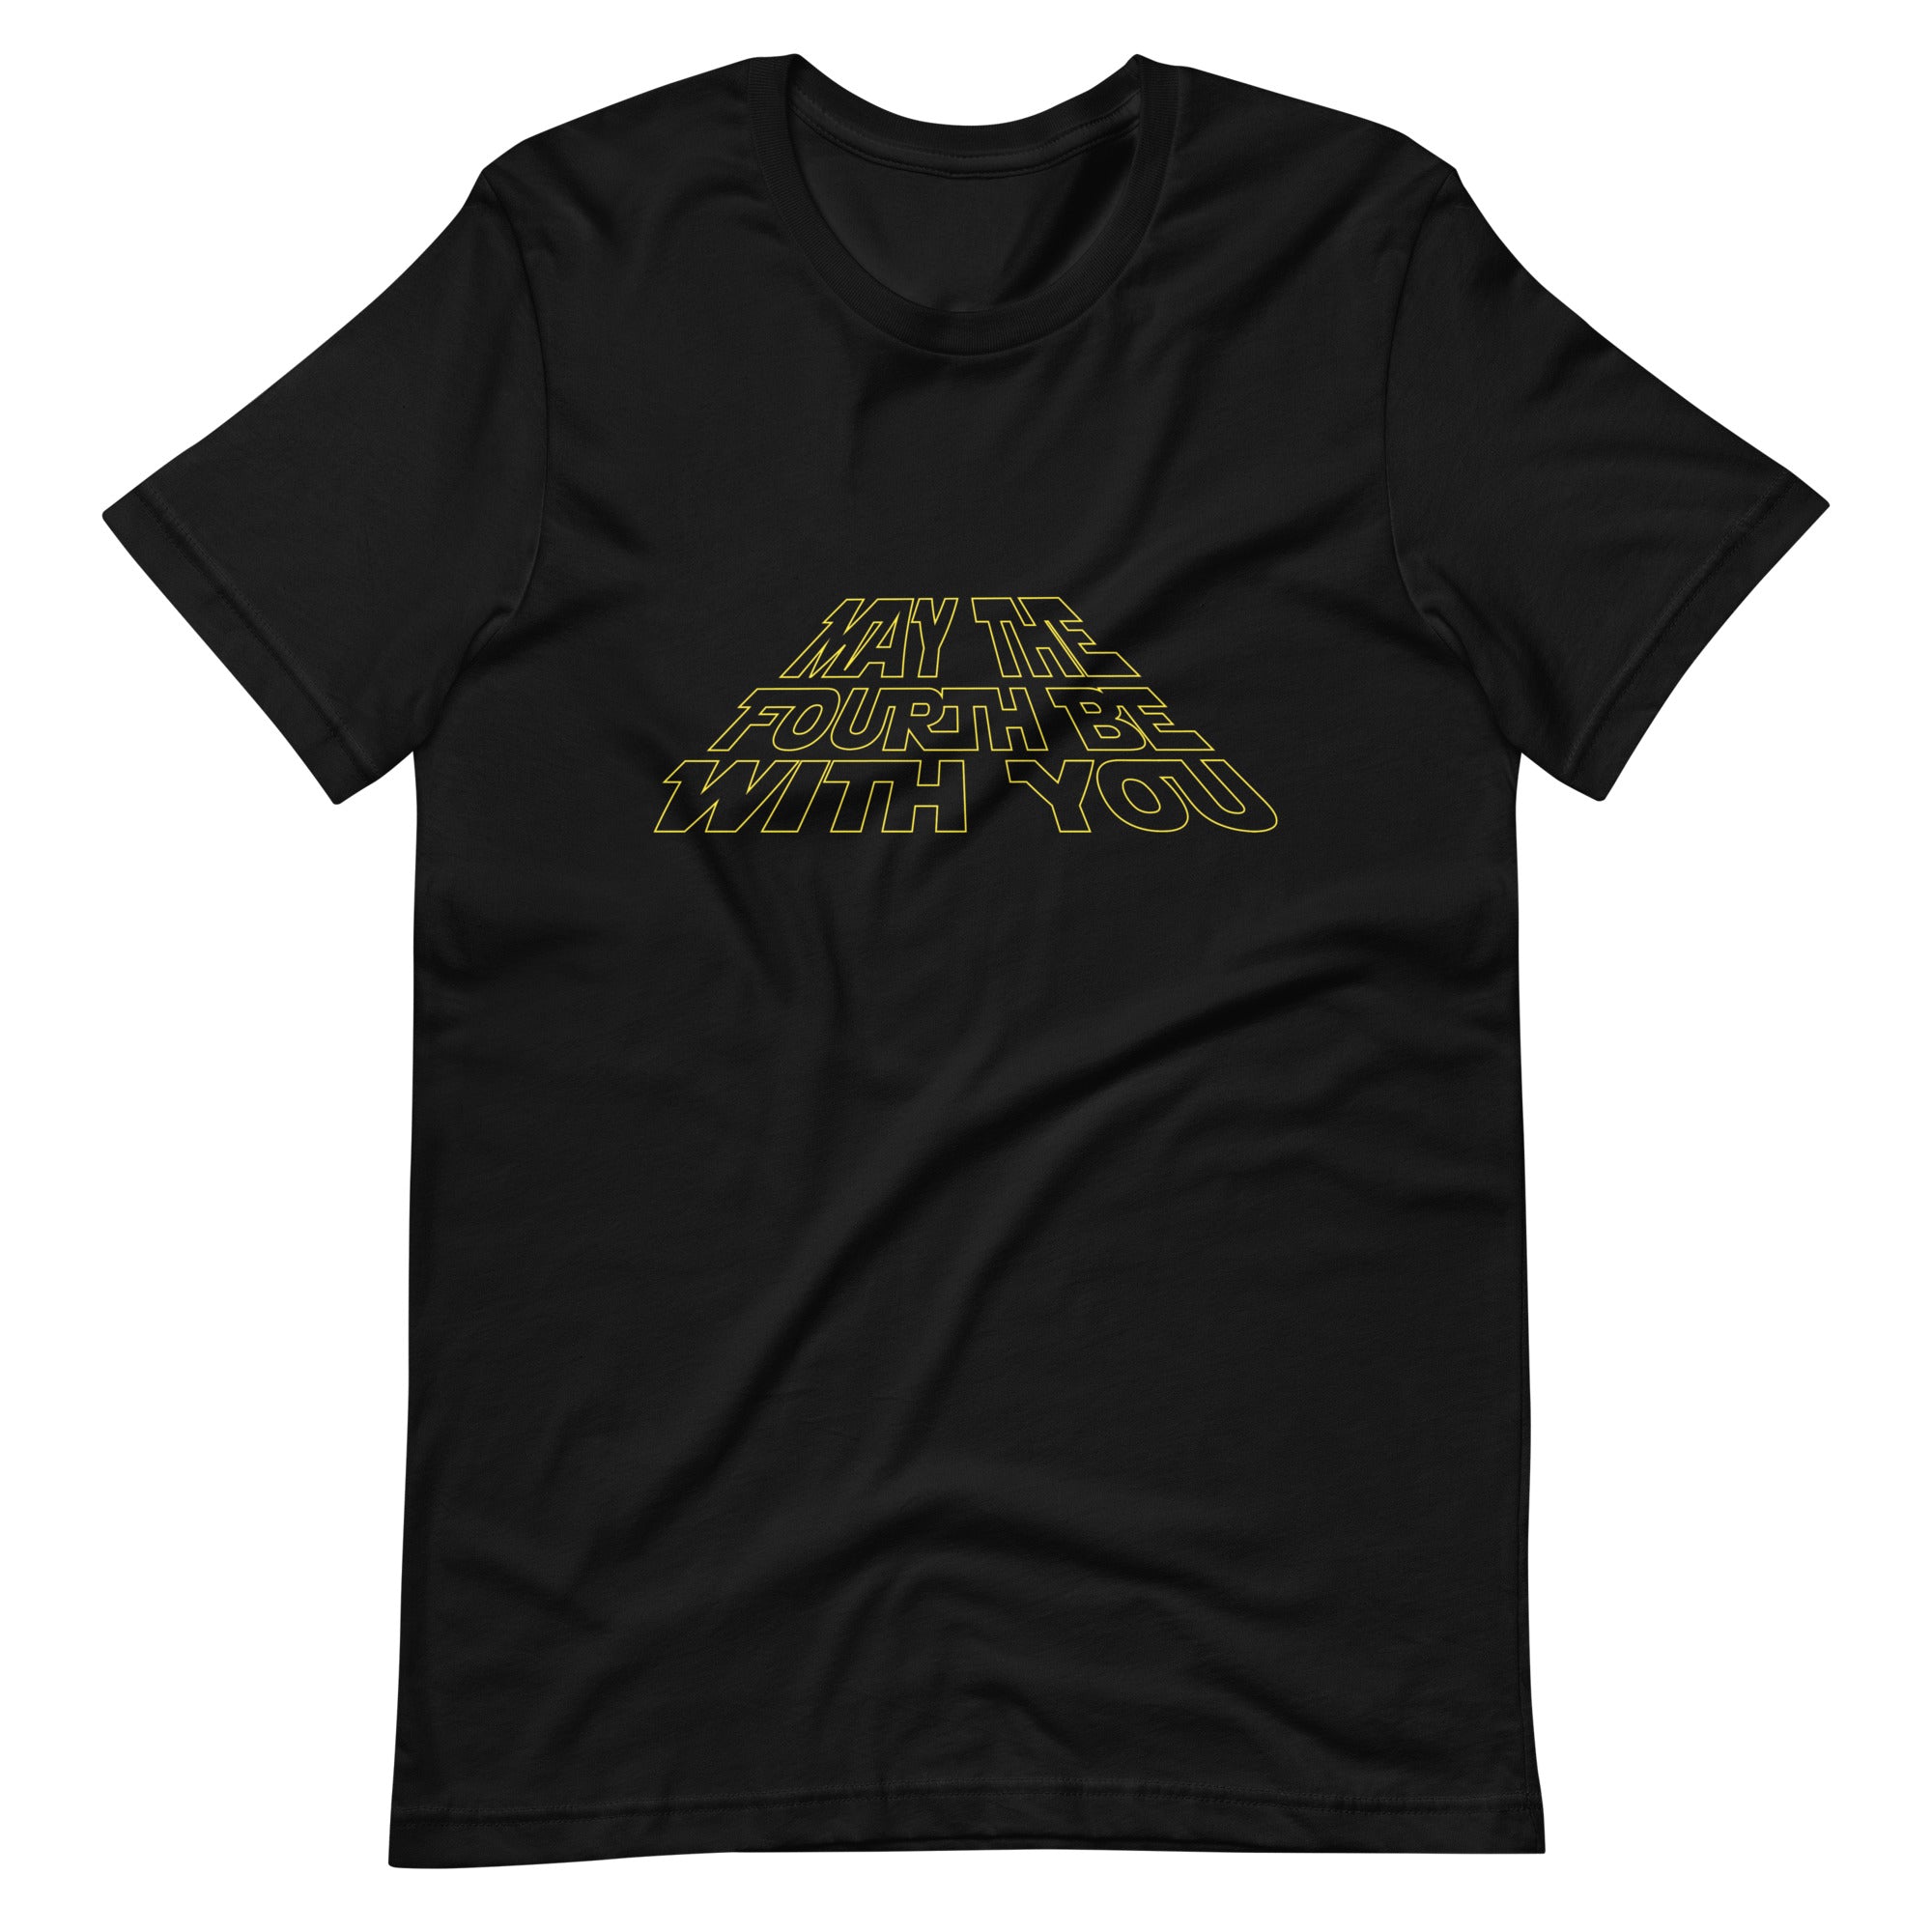 May The Fourth Be With You Tee